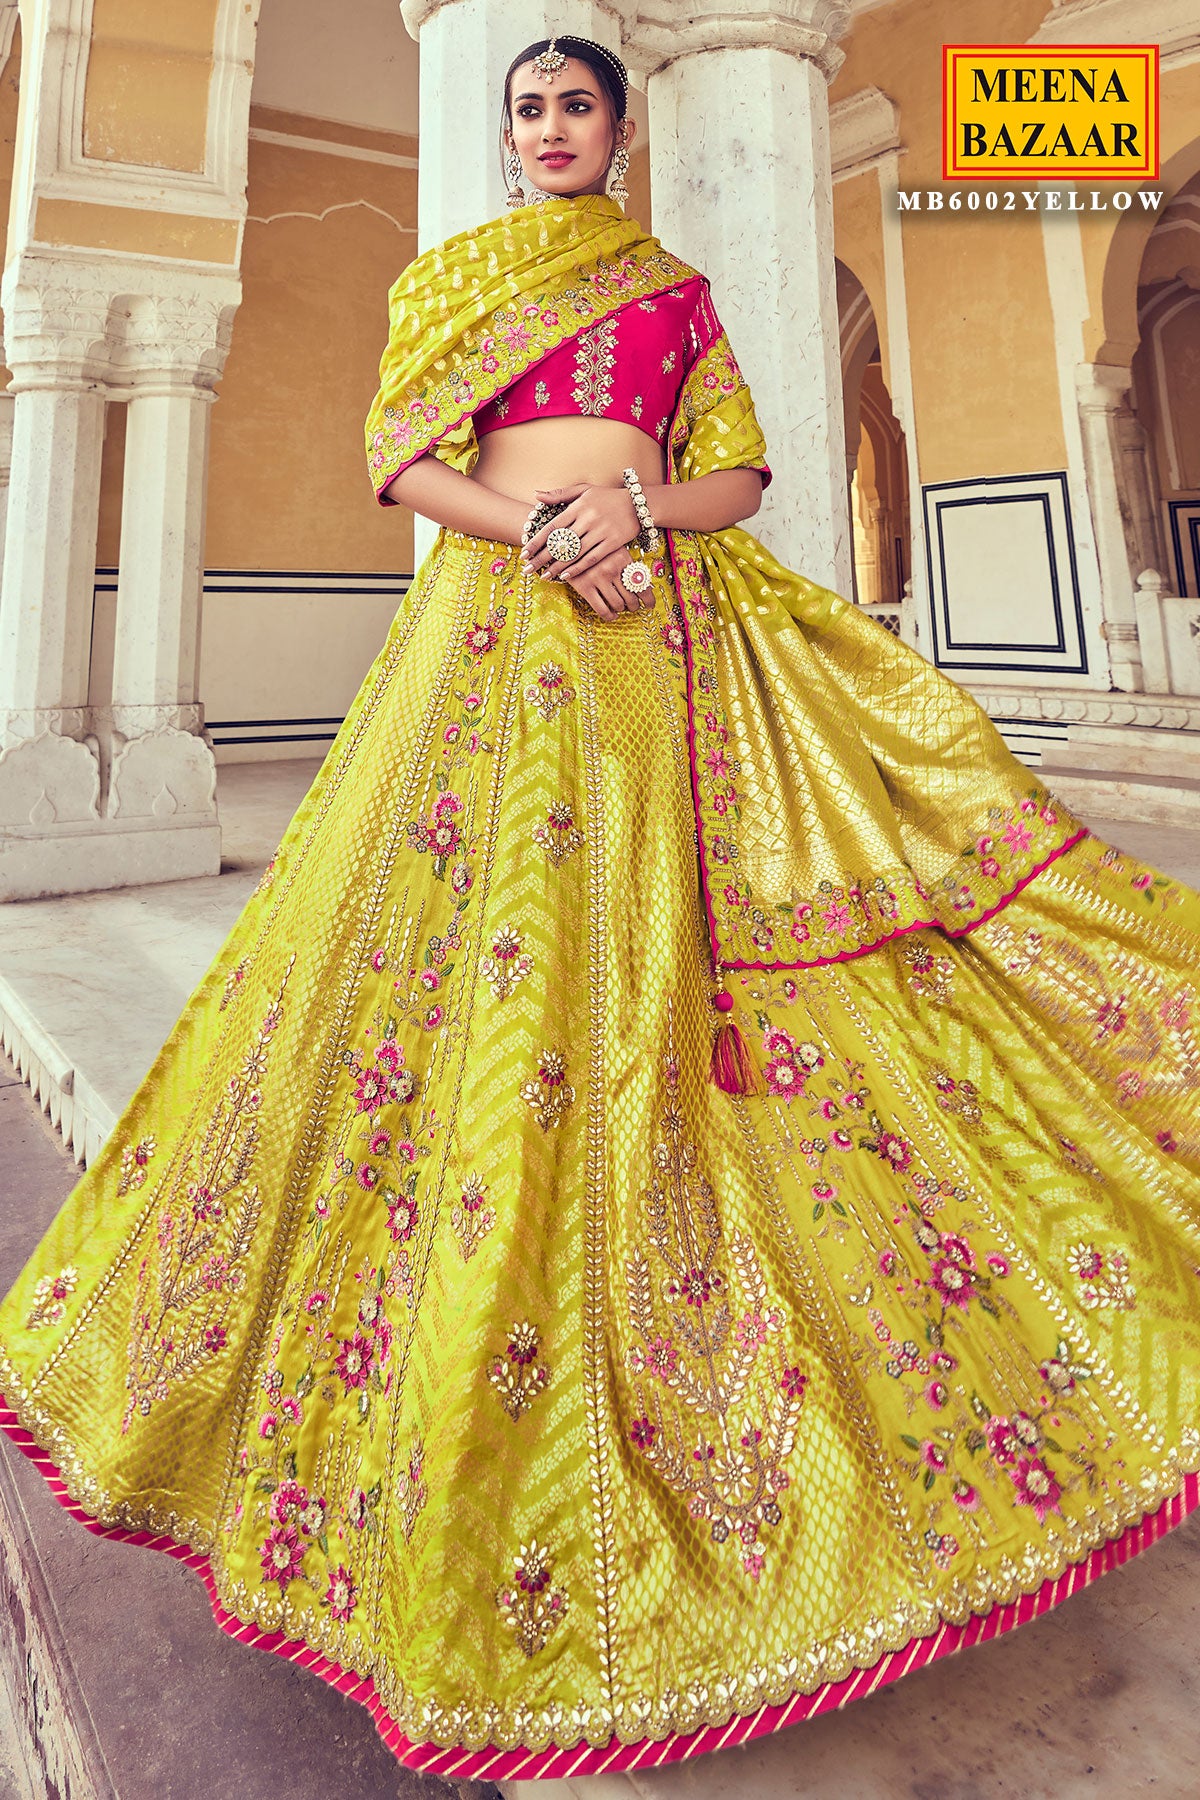 Meena Bazaar - Lehenga Saree with Net Ghera and Georgette Embroidery pallu  at BigIndianWedding.Com | Indian bridal wear, Indian attire, Indian outfits